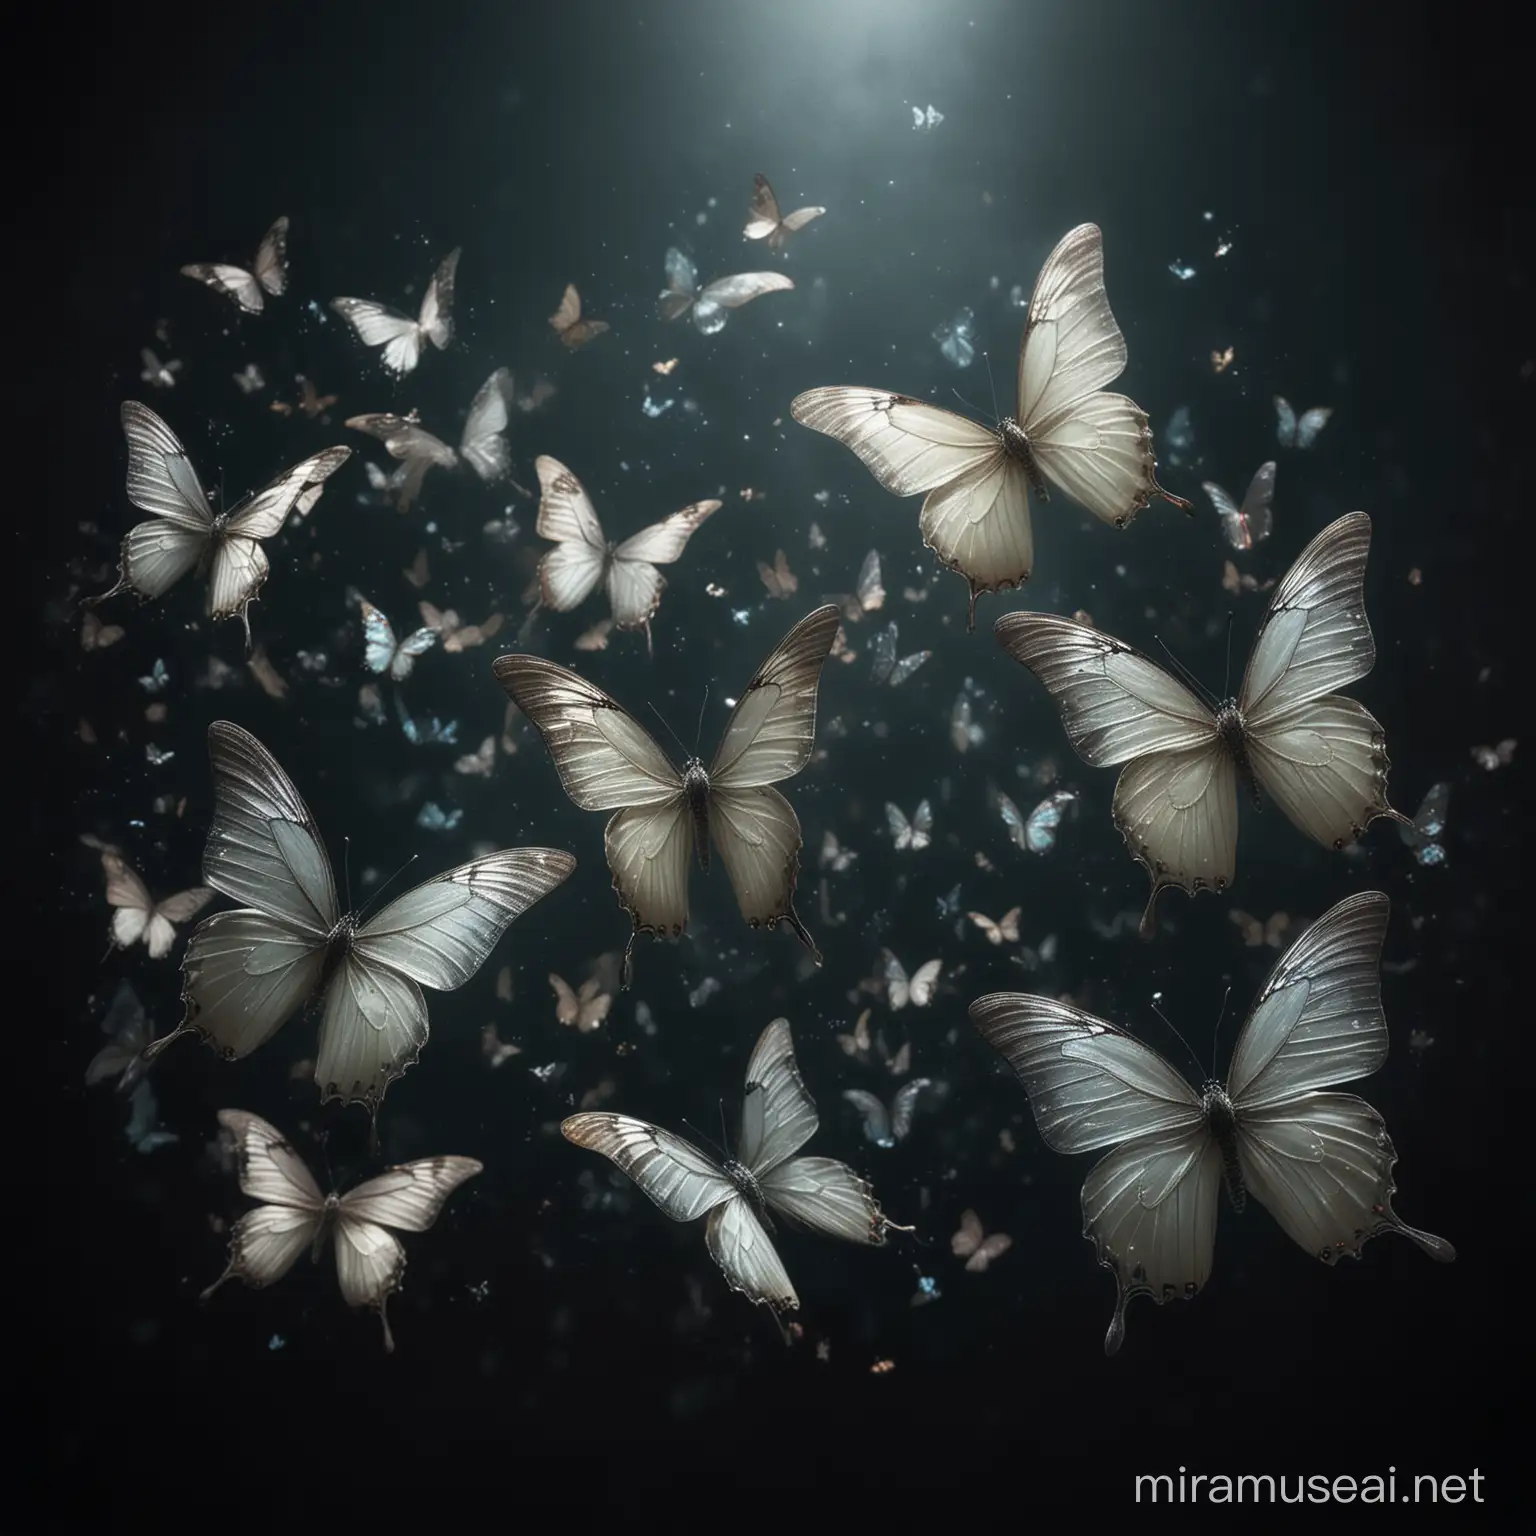 ethereal butterflies in a dark background